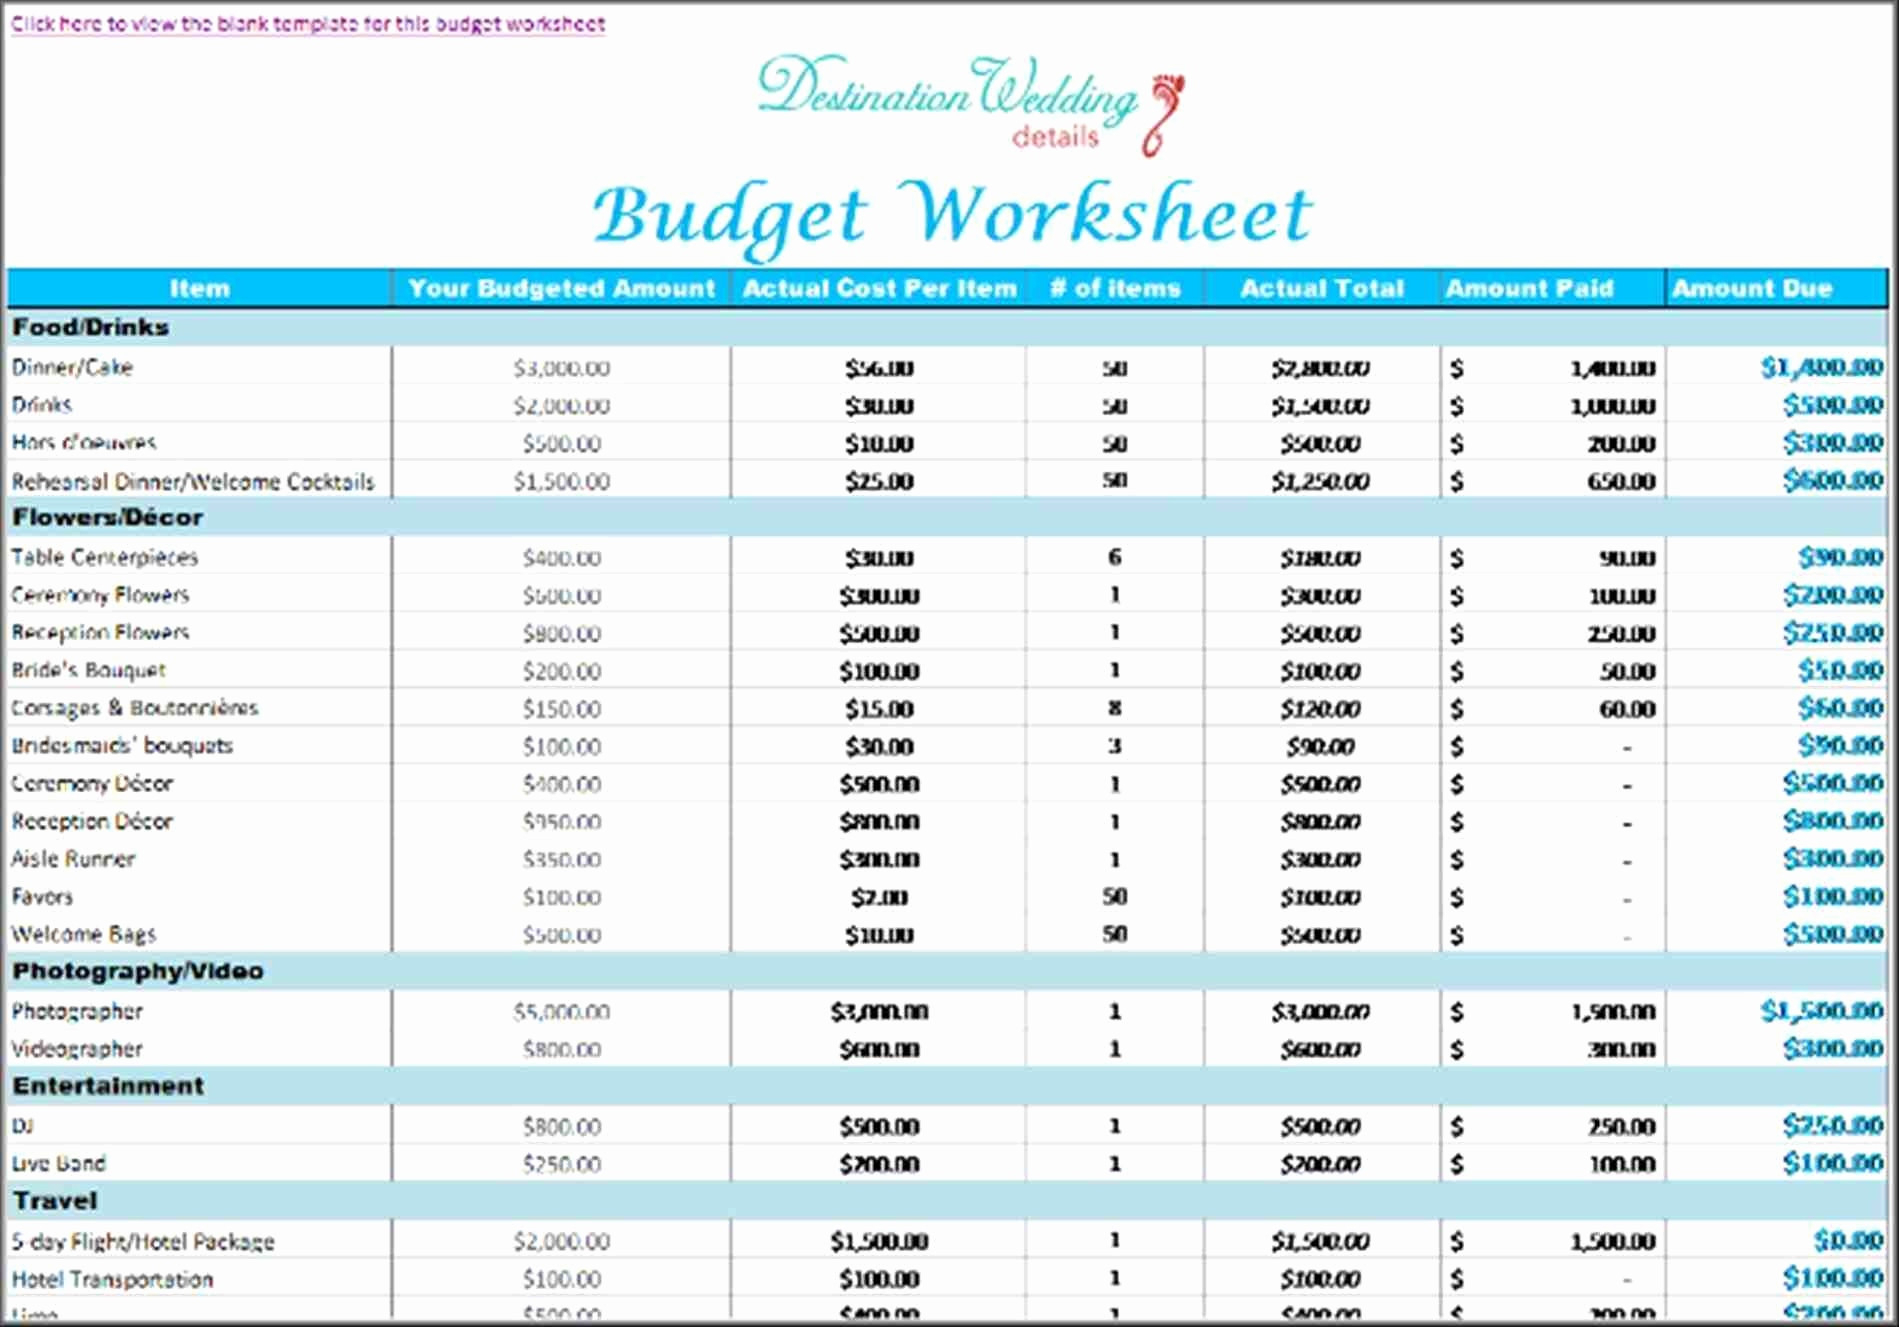 Wedding Budget Spreadsheet For 20K With Regard To Wedding Budget Spreadsheet Uk With Nz Plus South Africa Together For